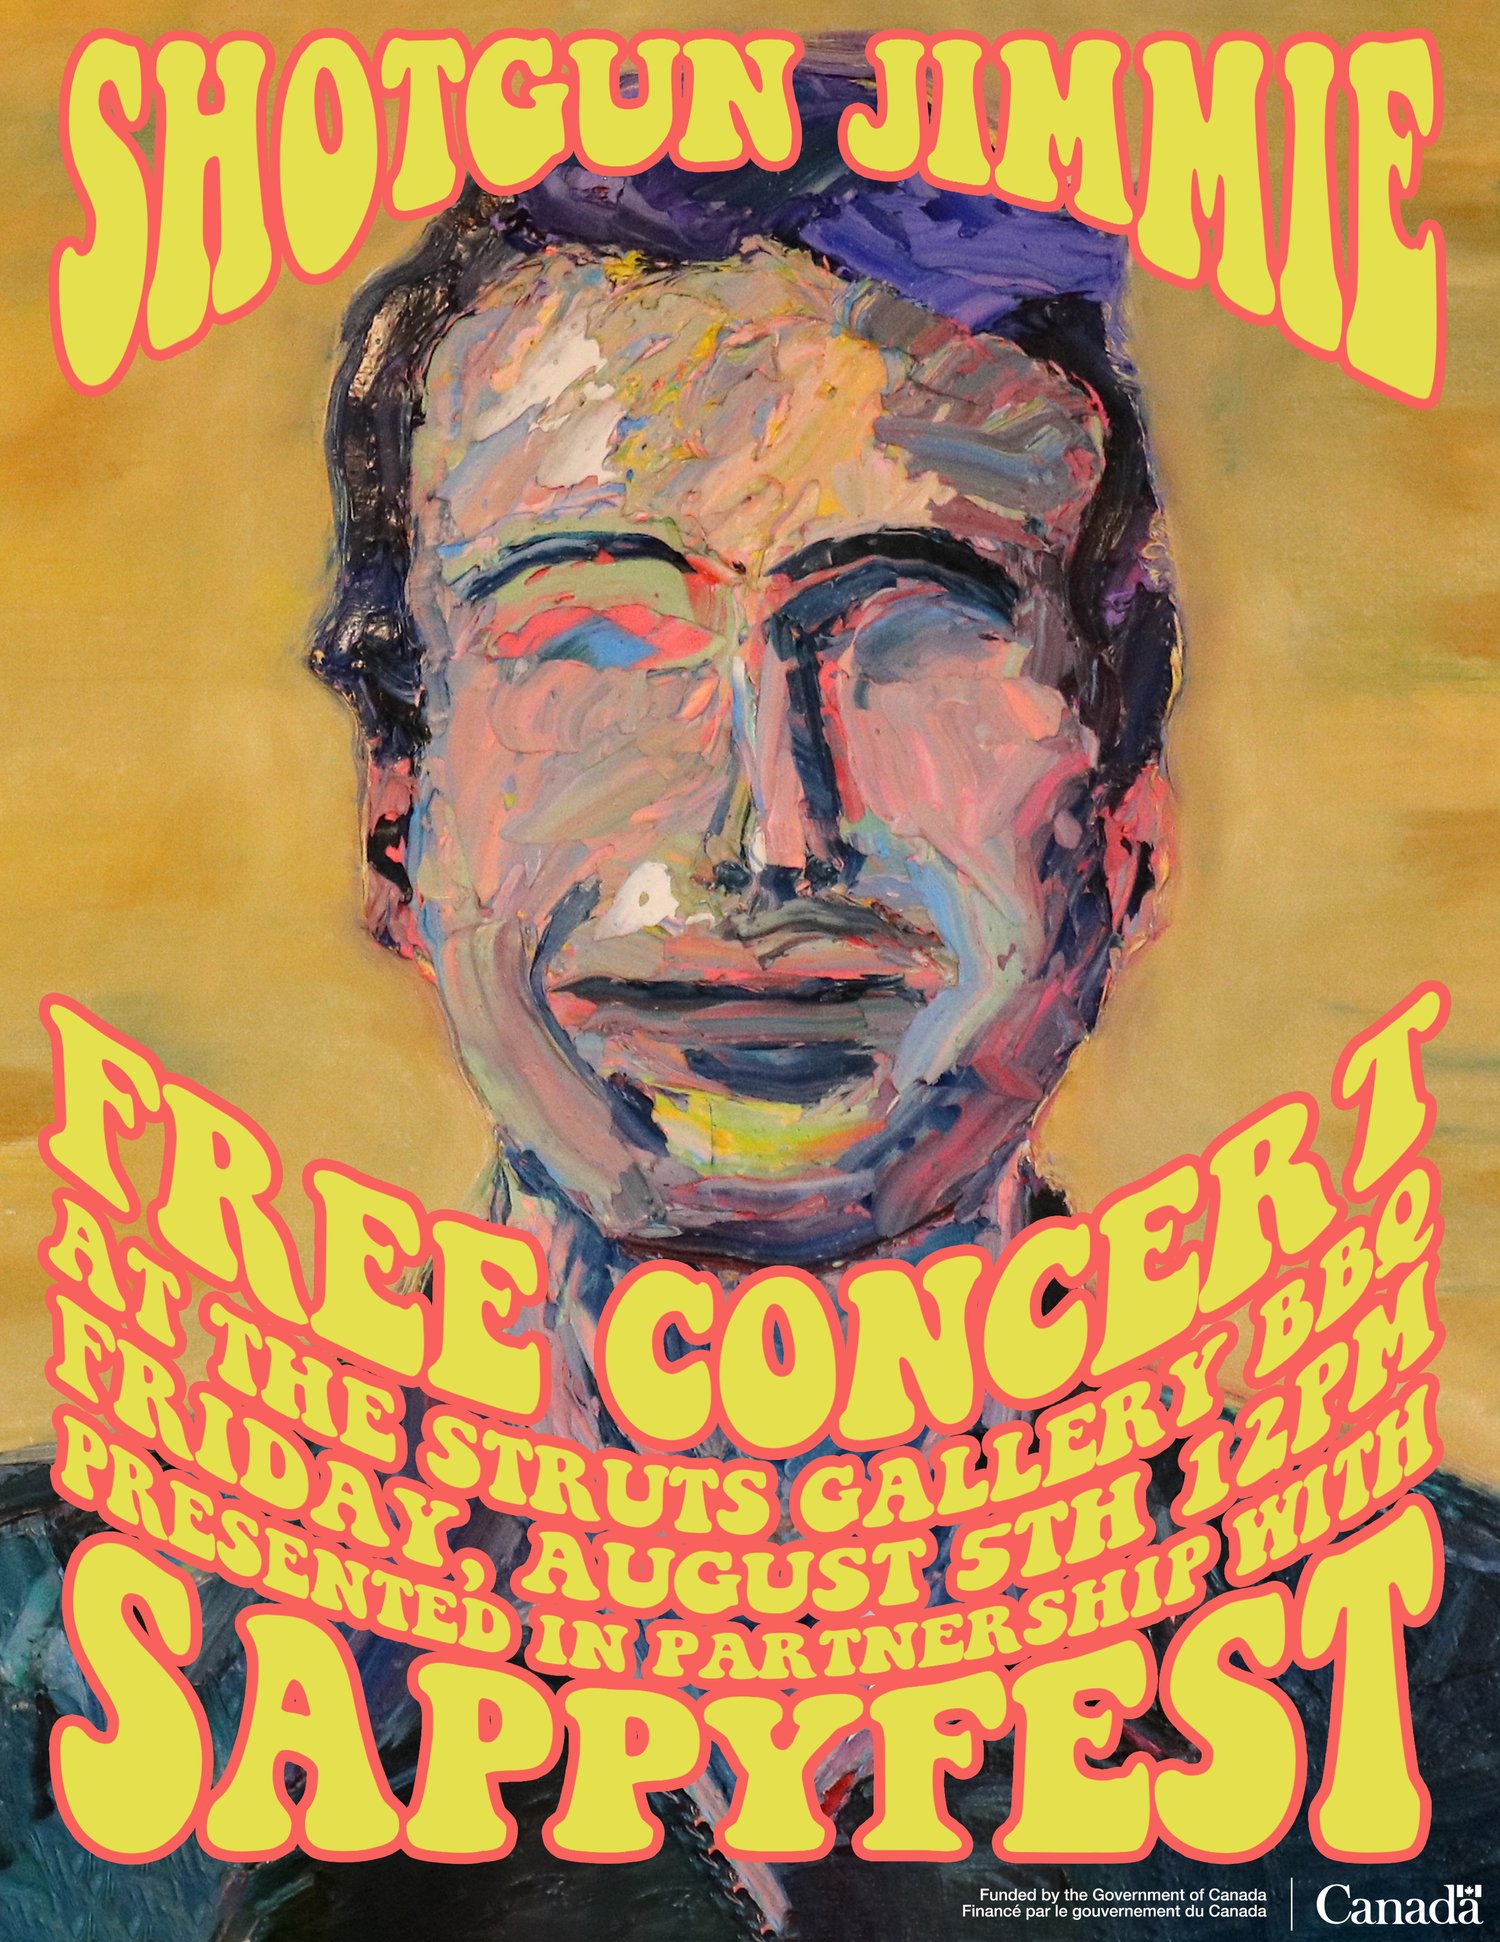 Shotgun Jimmie free concert at the Struts Gallery BBQ Friday, August 5th, 12pm. Presented in partnership with Sappyfest.